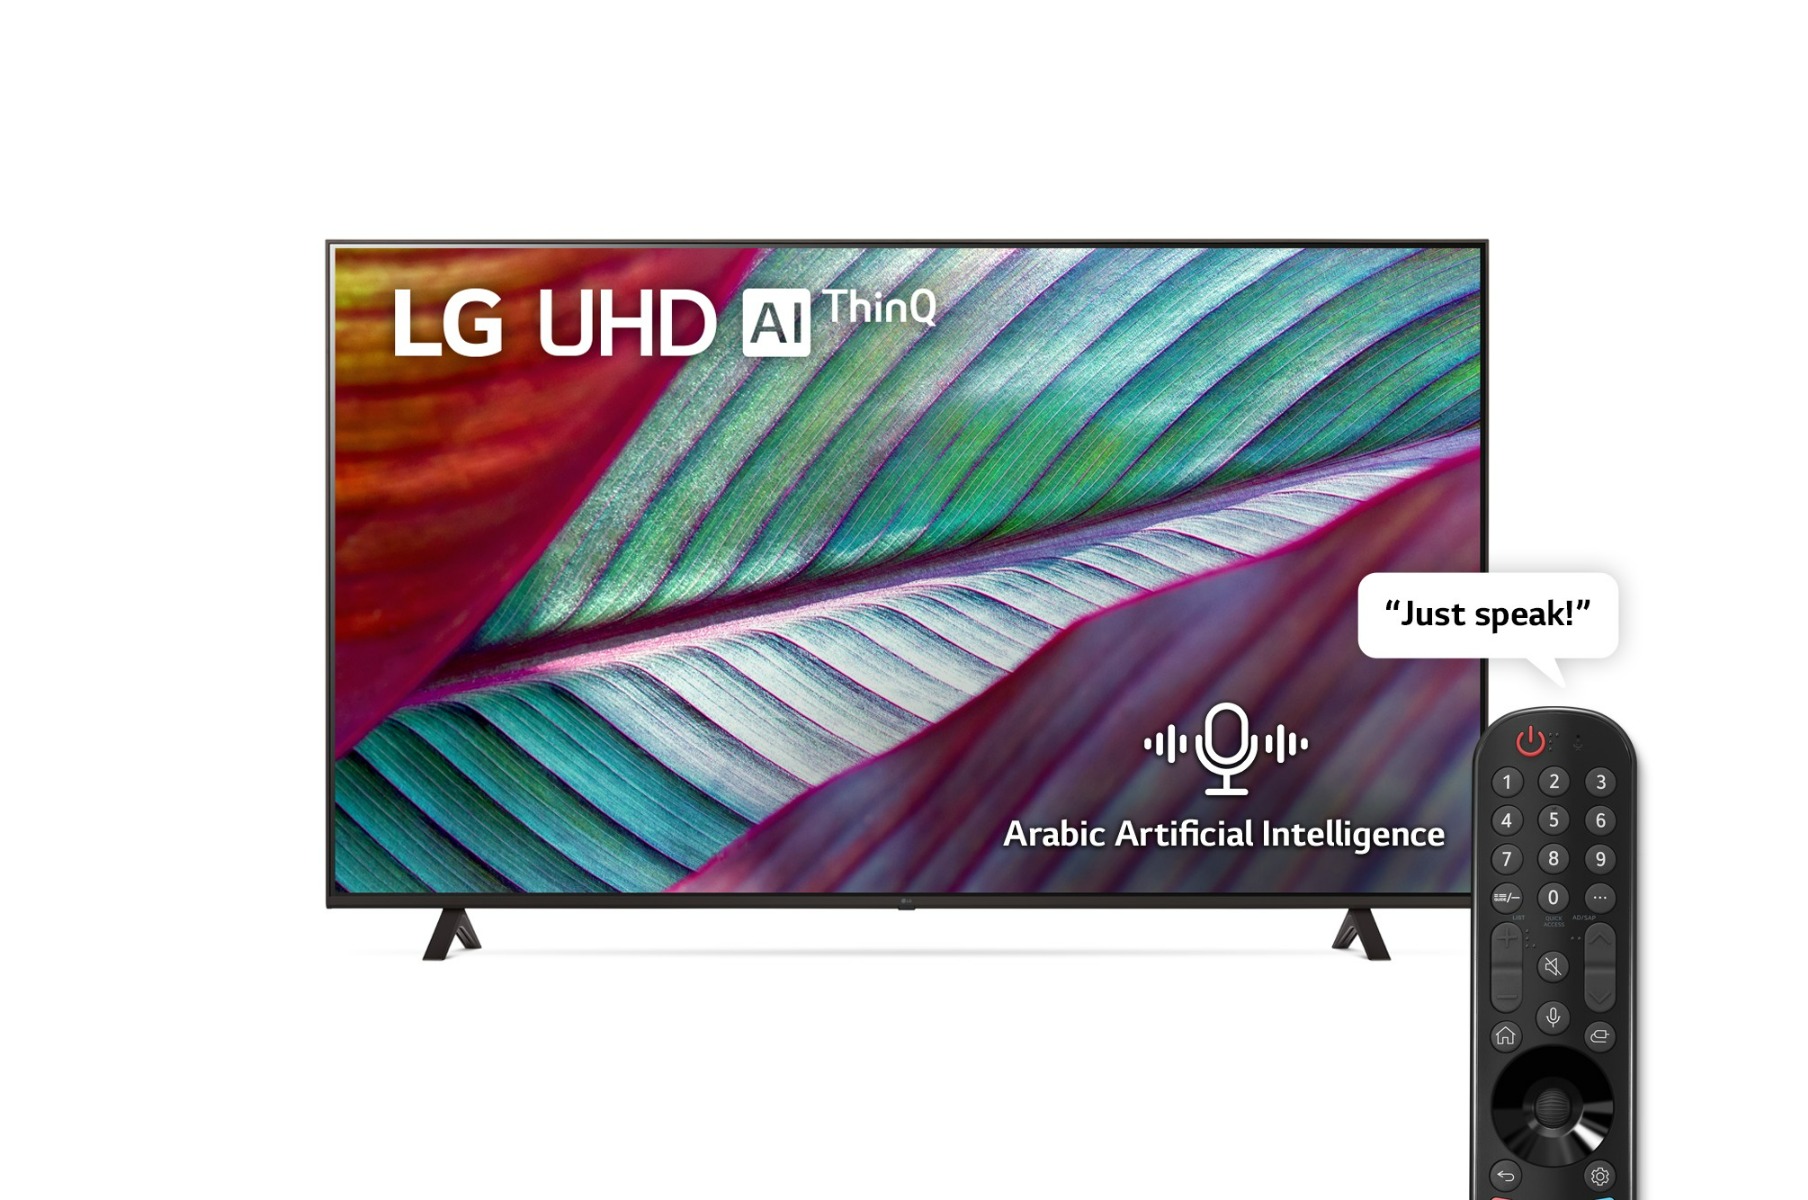 LG 65 Inch 4K UHD Smart LED TV with Built-in Receiver - 65UR78006LL